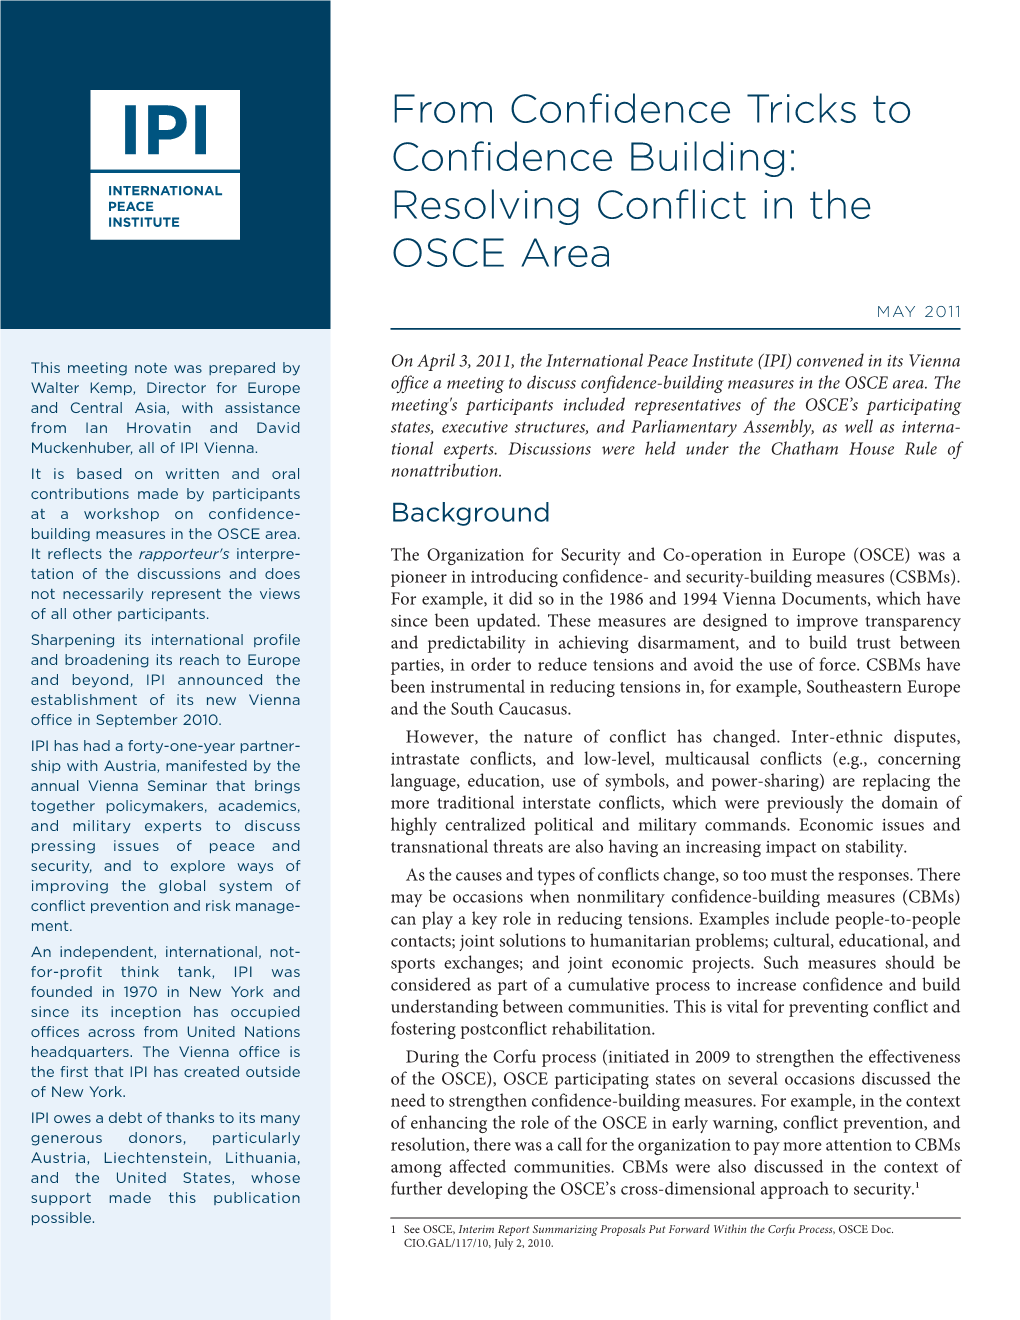 From Confidence Tricks to Confidence Building: Resolving Conflict in the OSCE Area